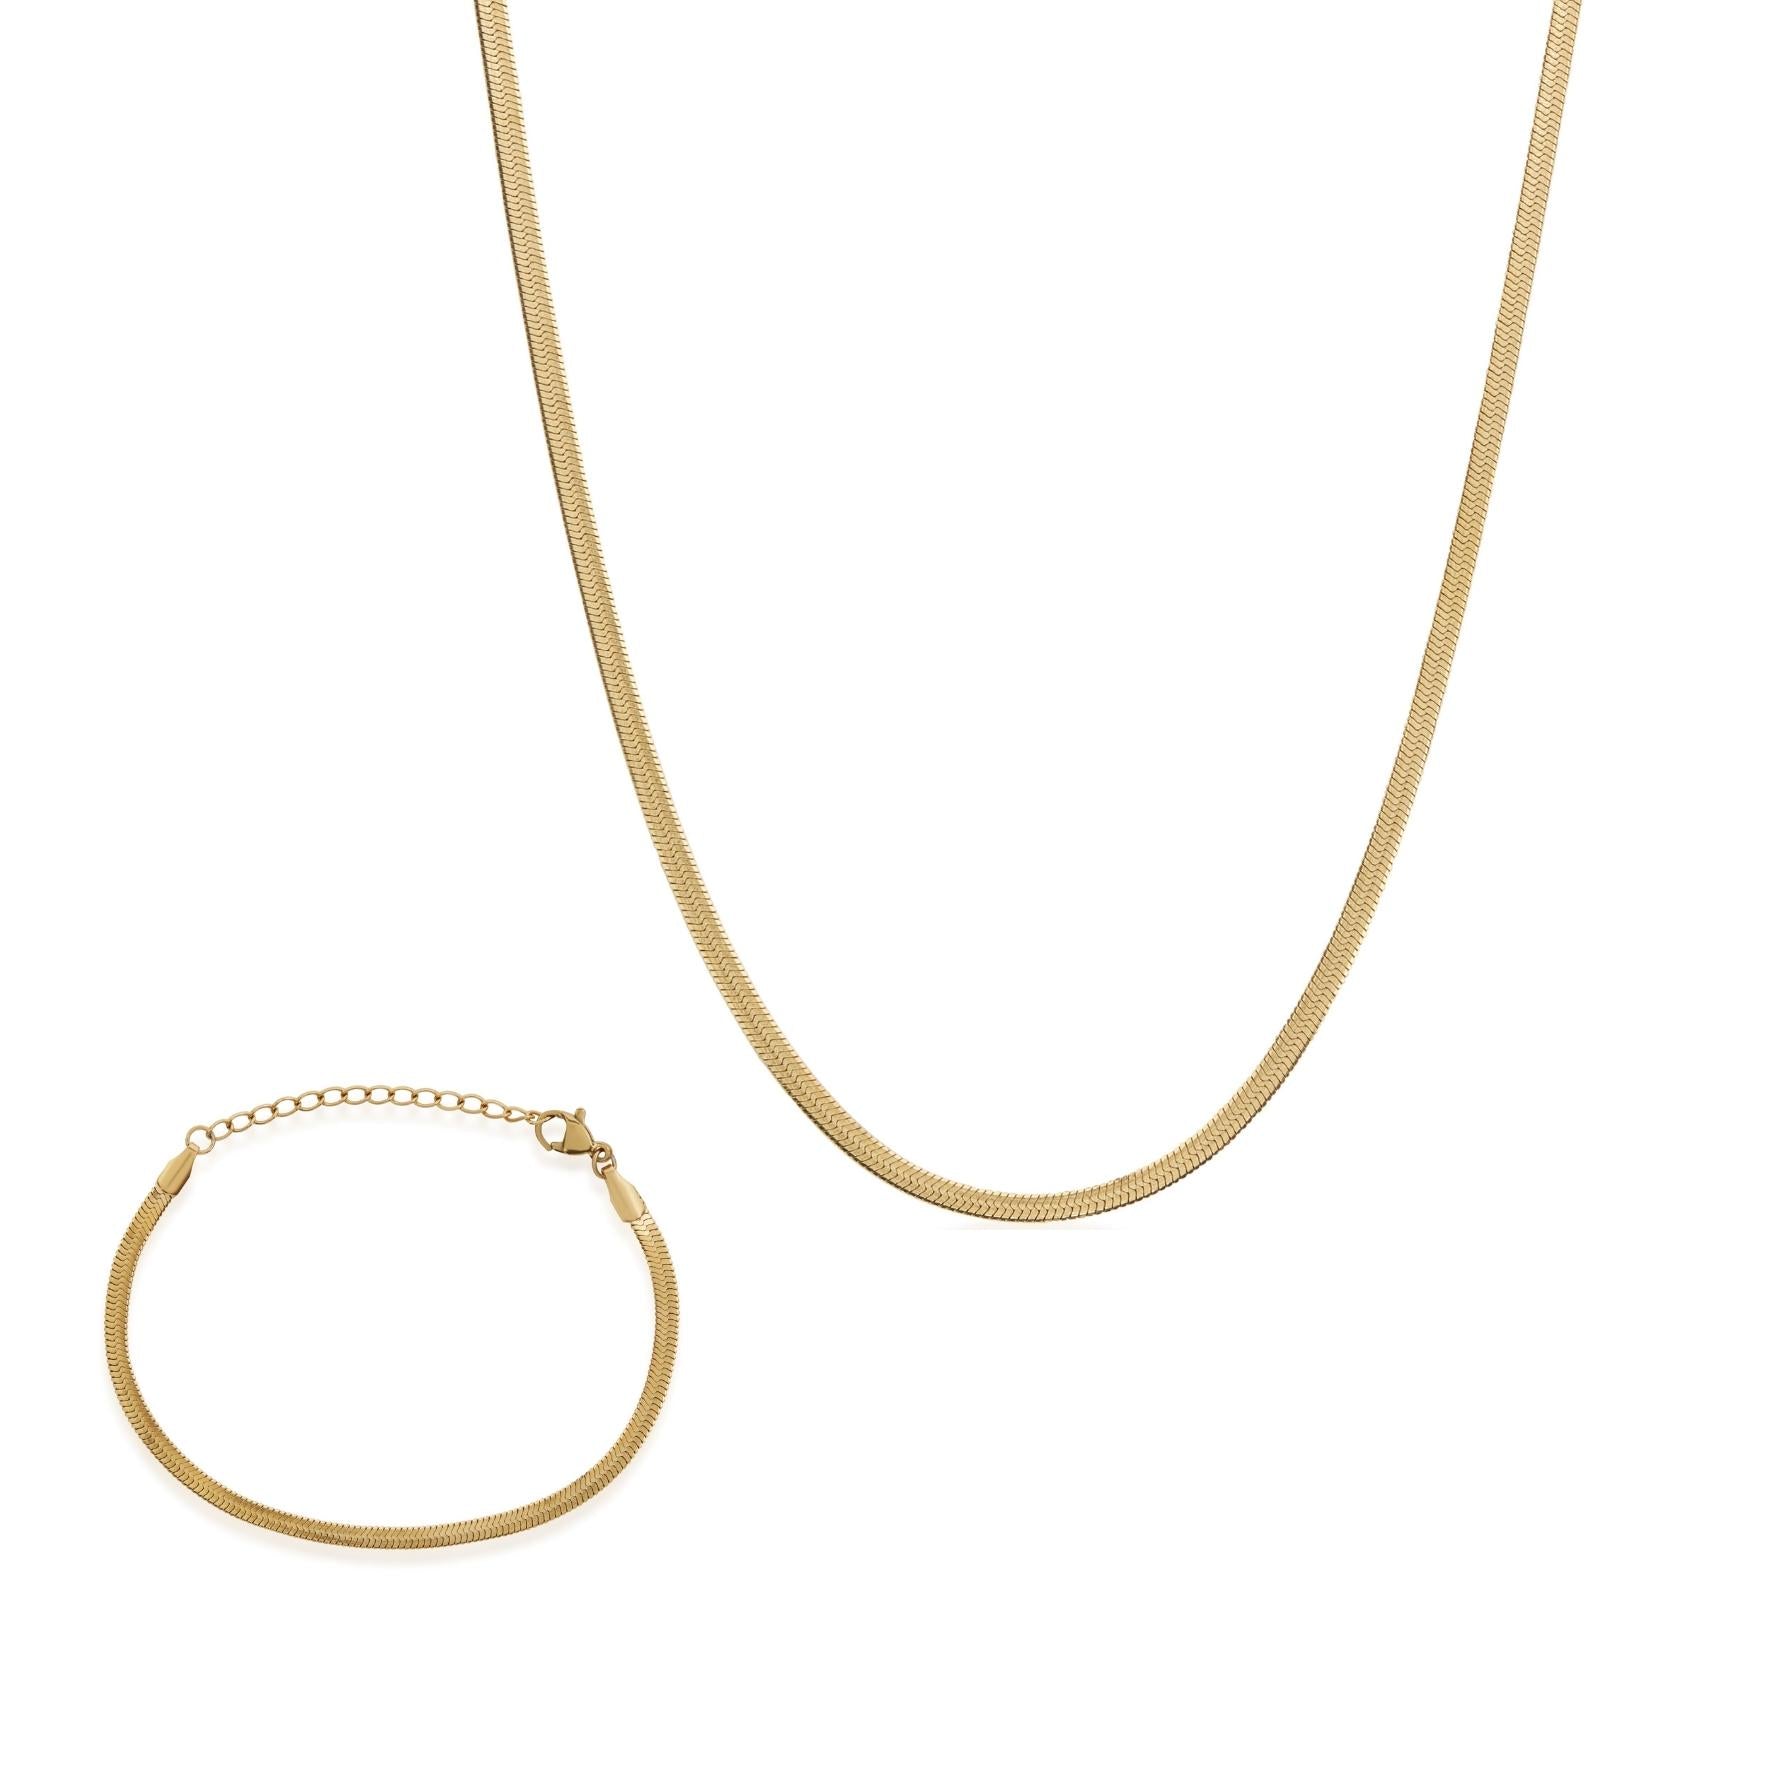 Gold Plated Stainless Steel Thick Chain Necklace and Bracelet Set |  Necklaces | Costume & Fashion Jewellery